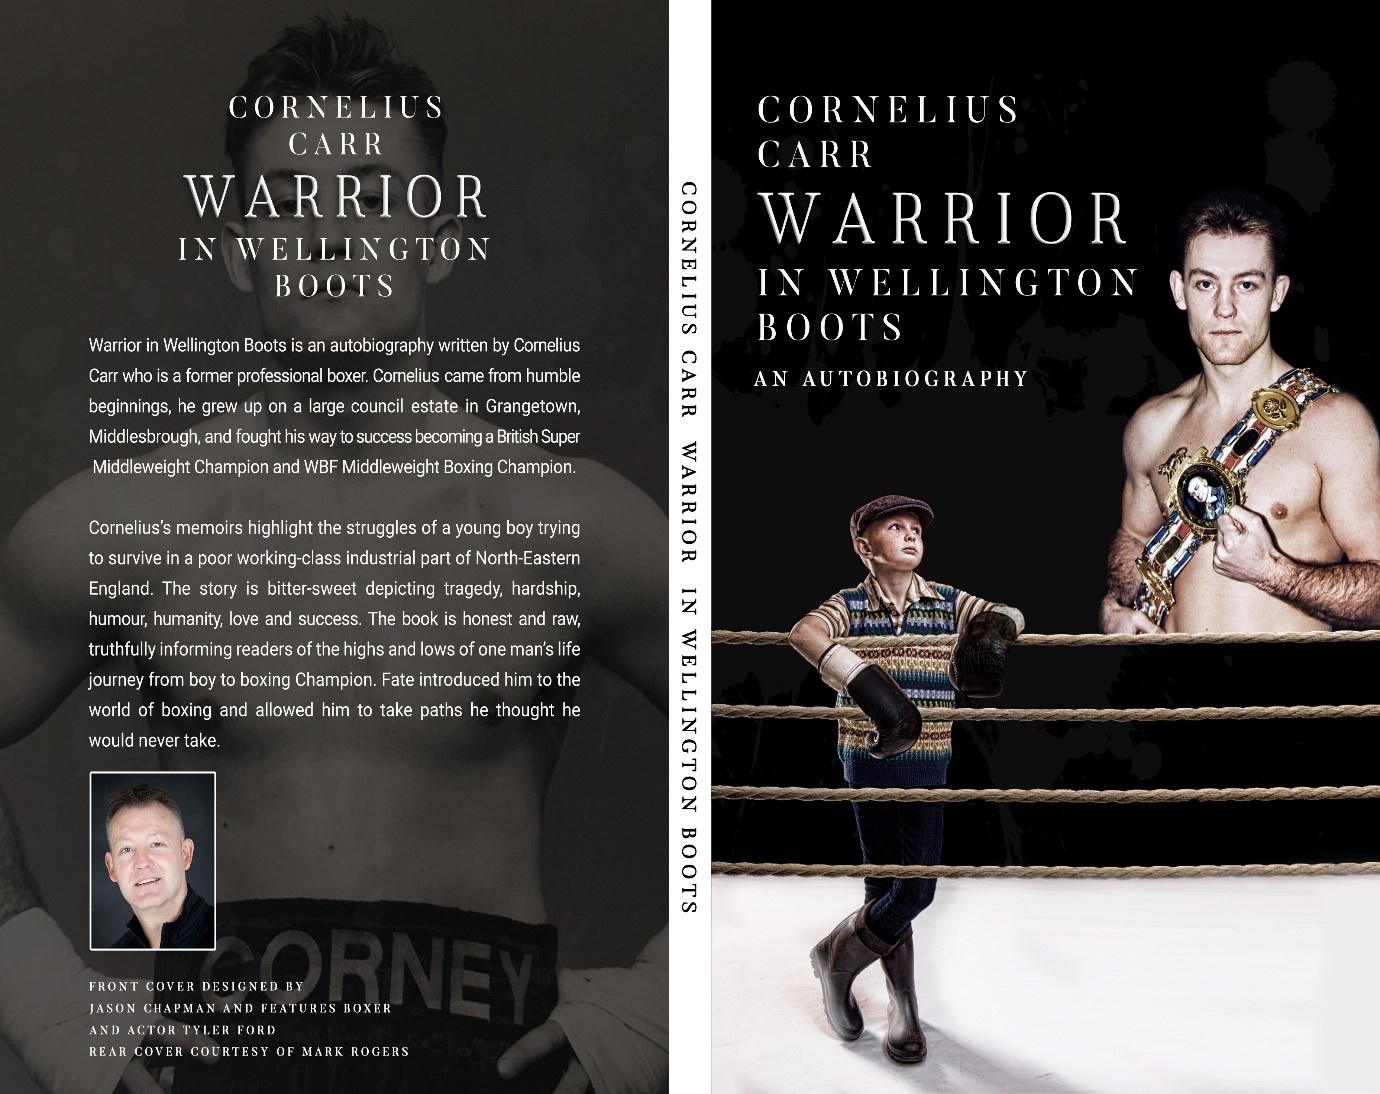 Warrior in Wellington Boots: An Autobiography by Cornelius Carr